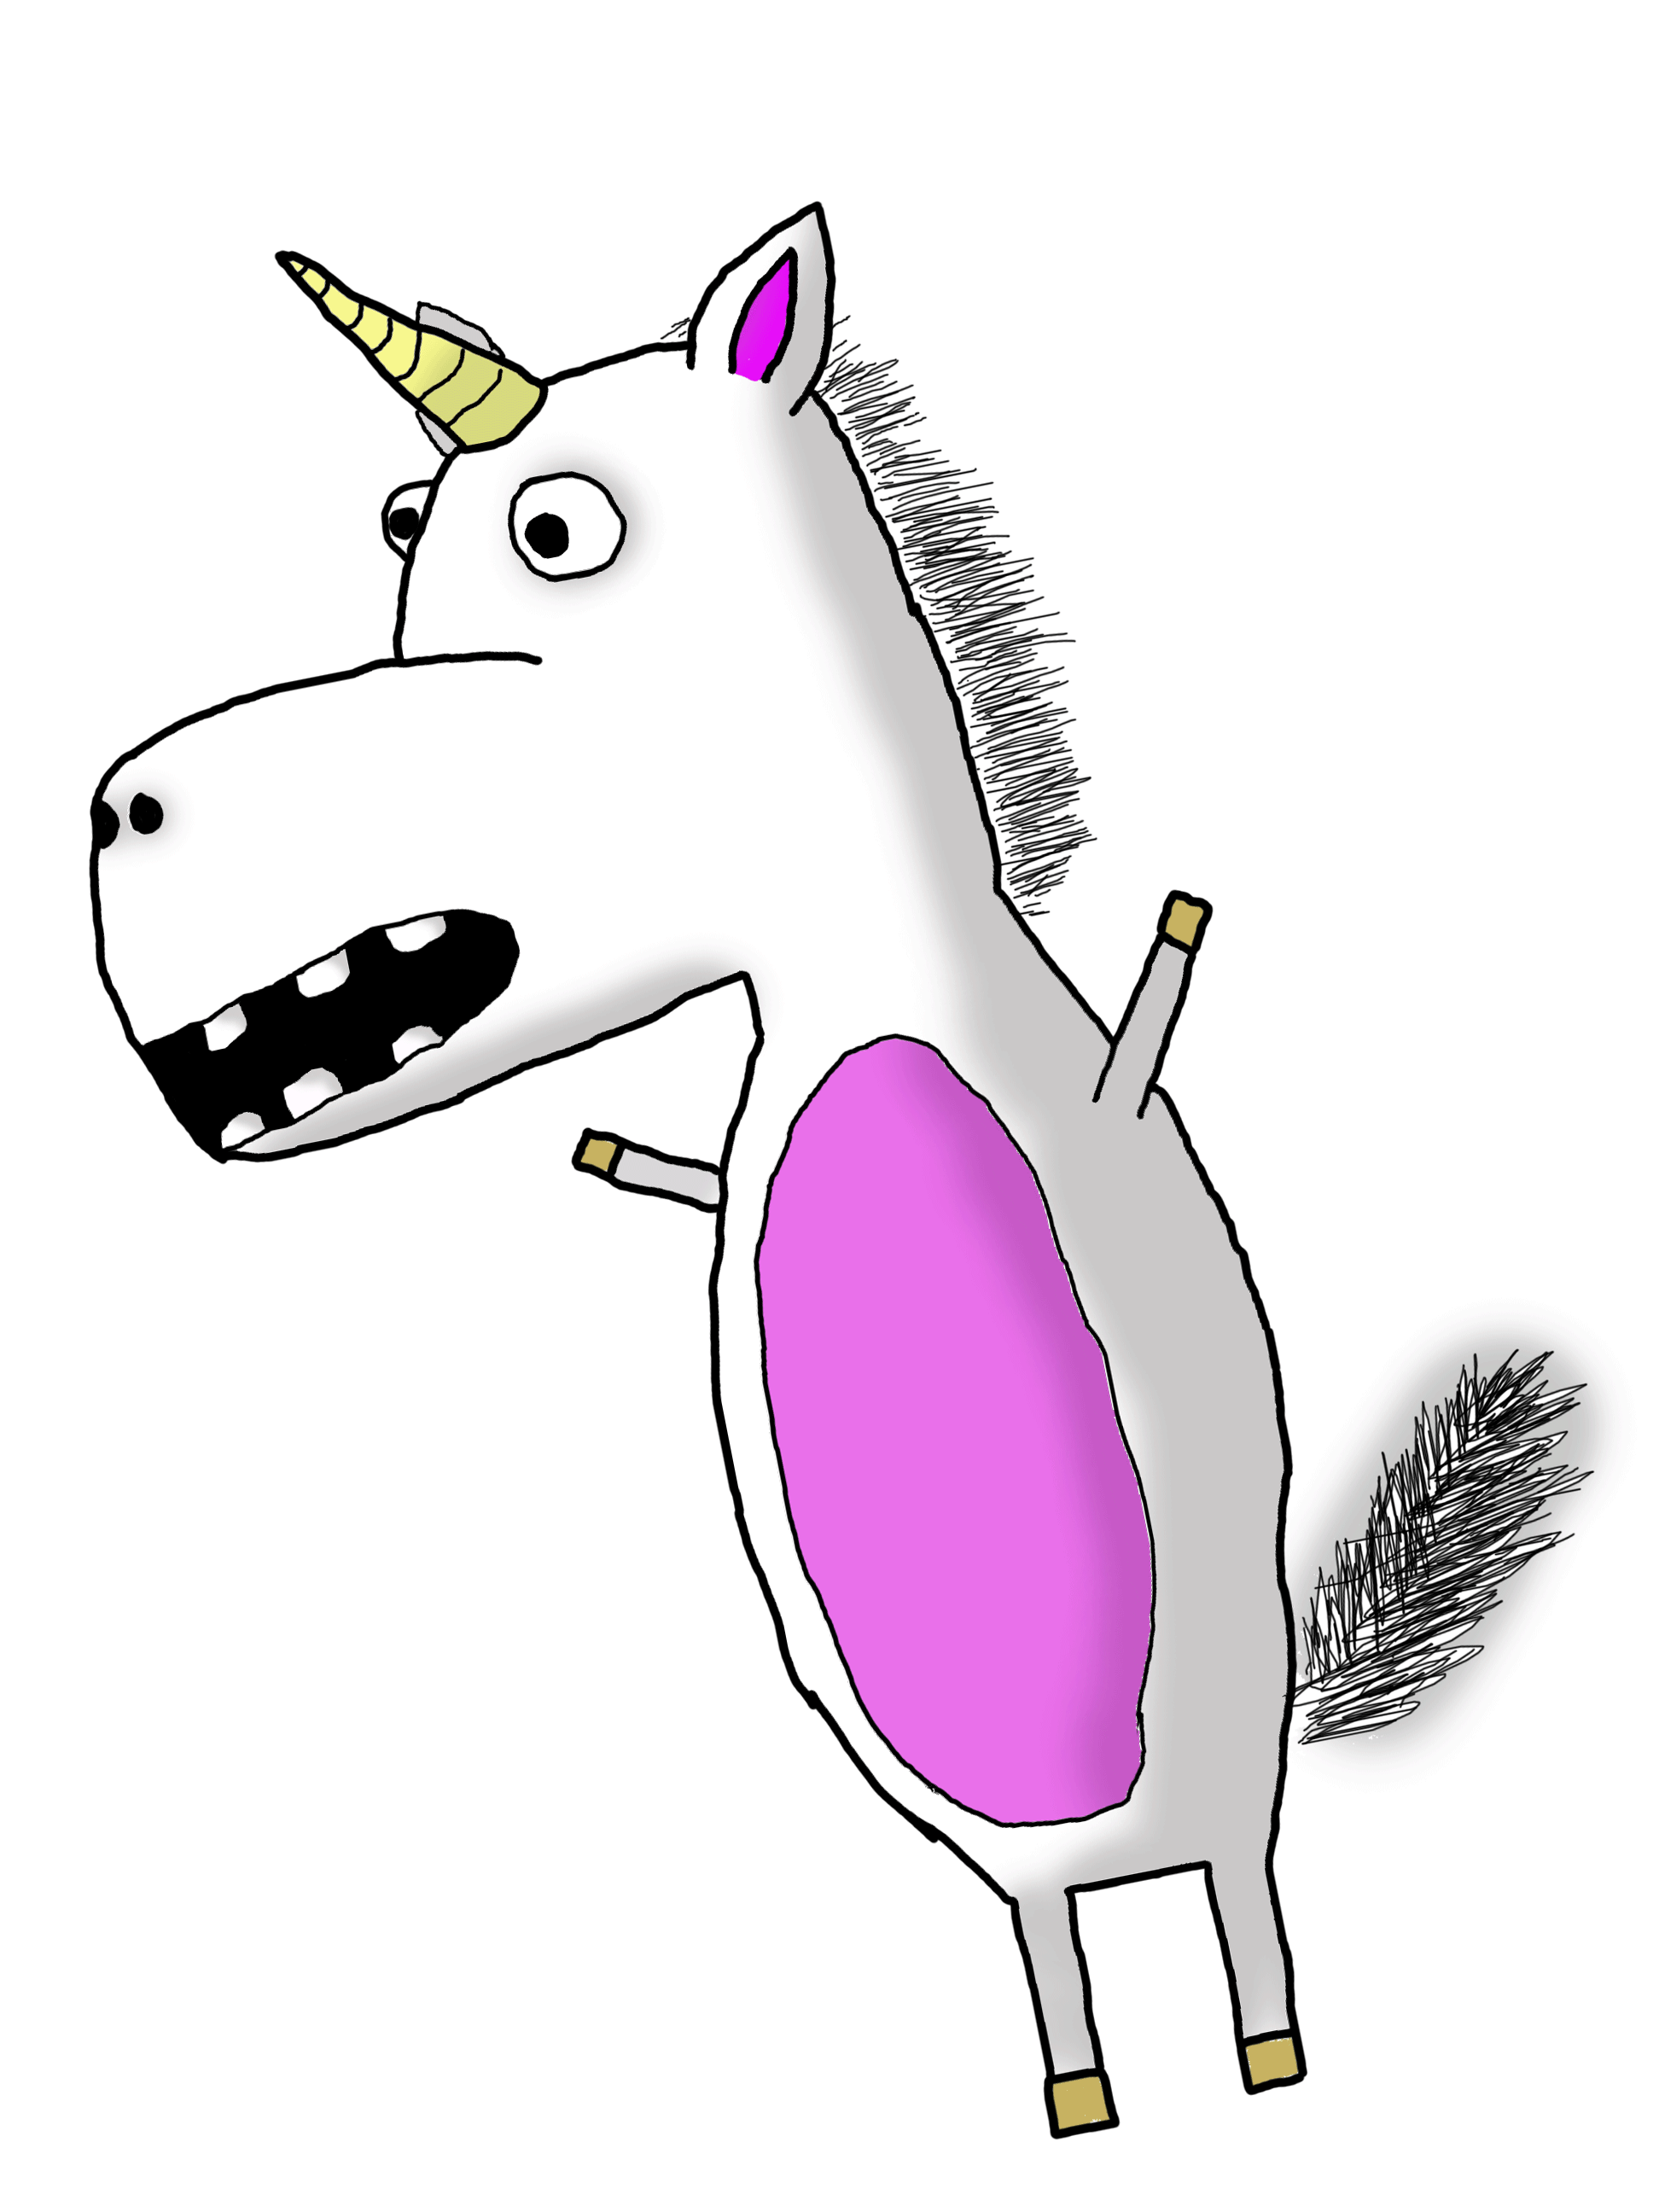 Animated Unicorn Pictures   ClipArt Best